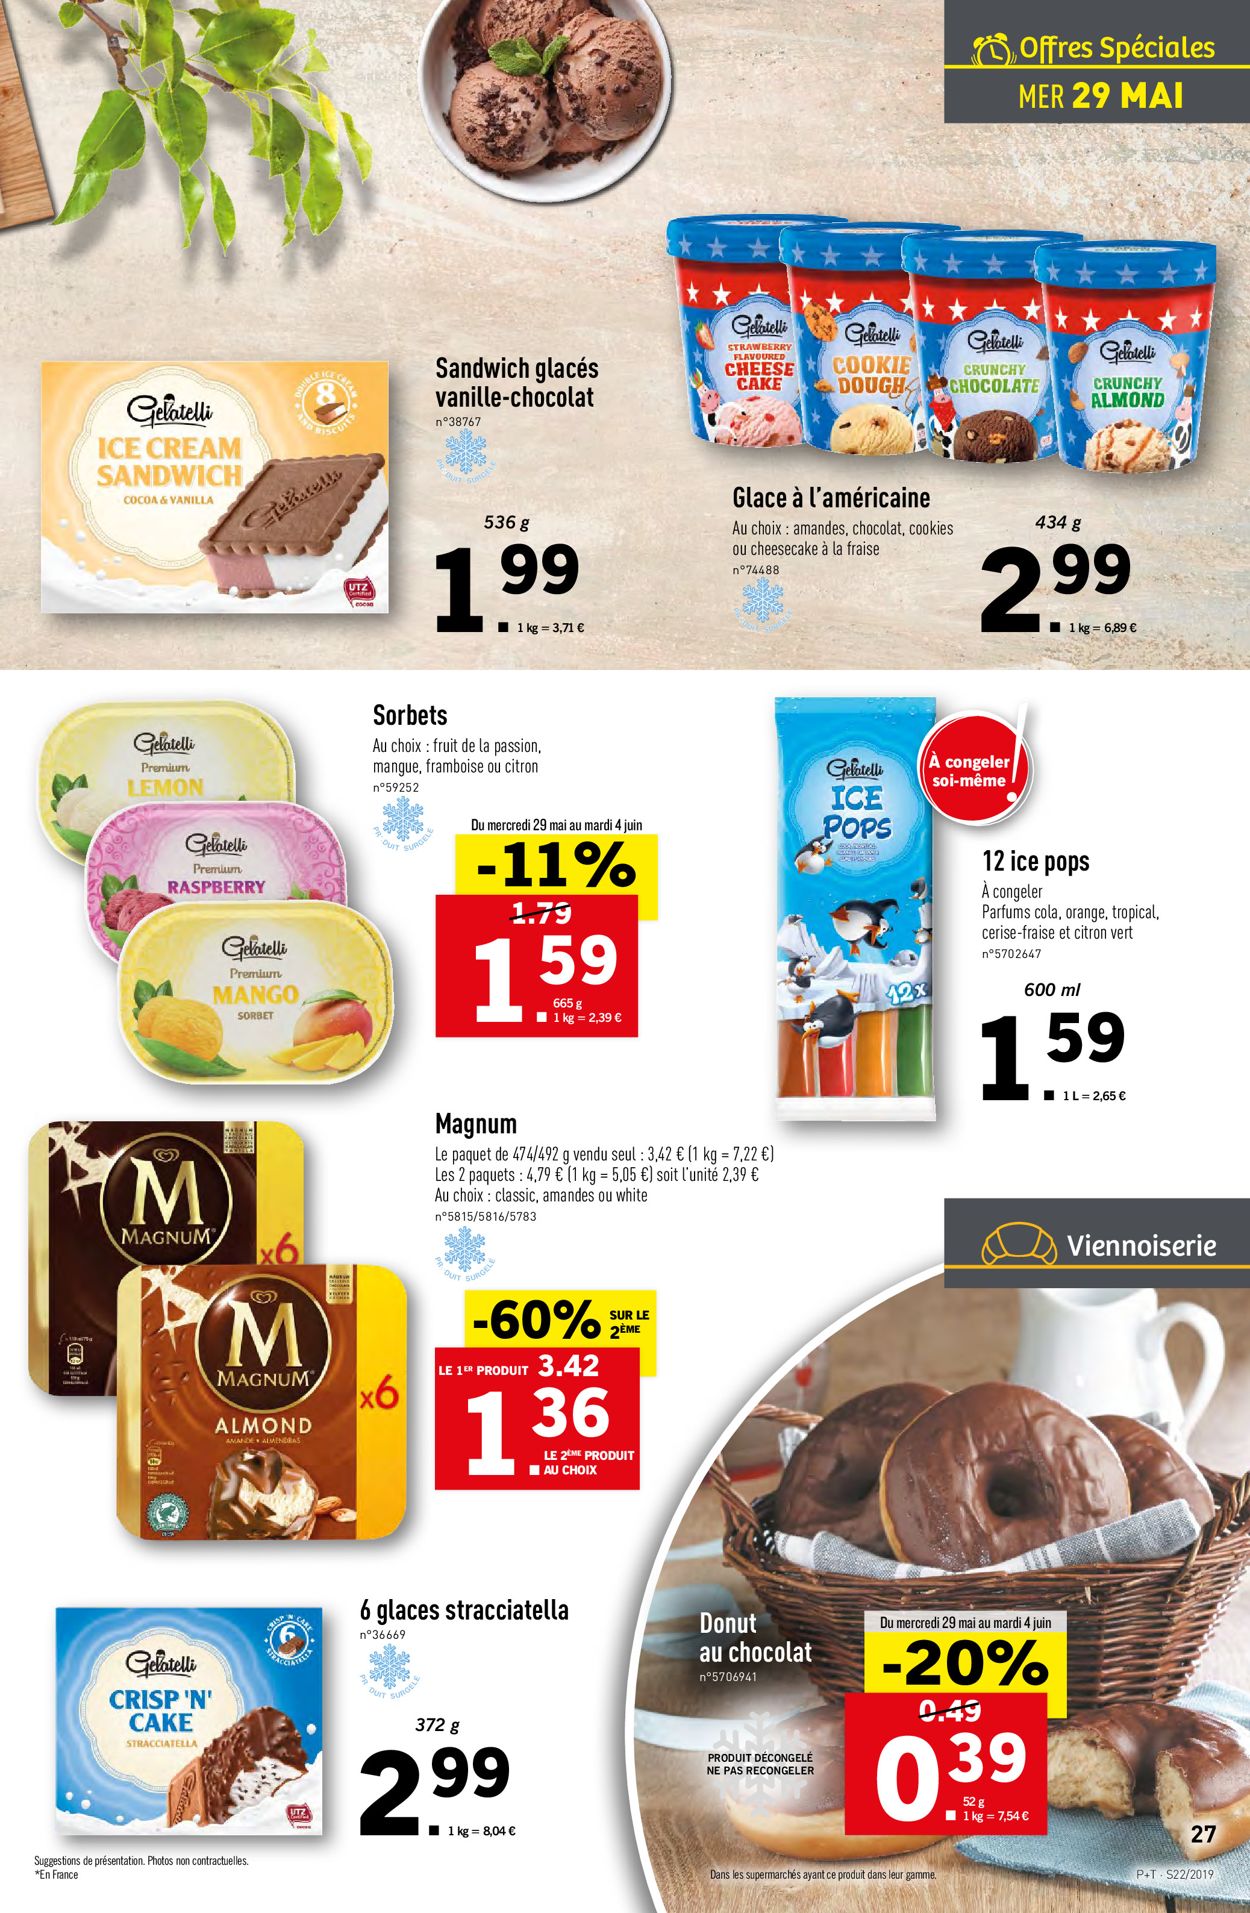 Lidl Catalogue - 29.05-04.06.2019 (Page 27)